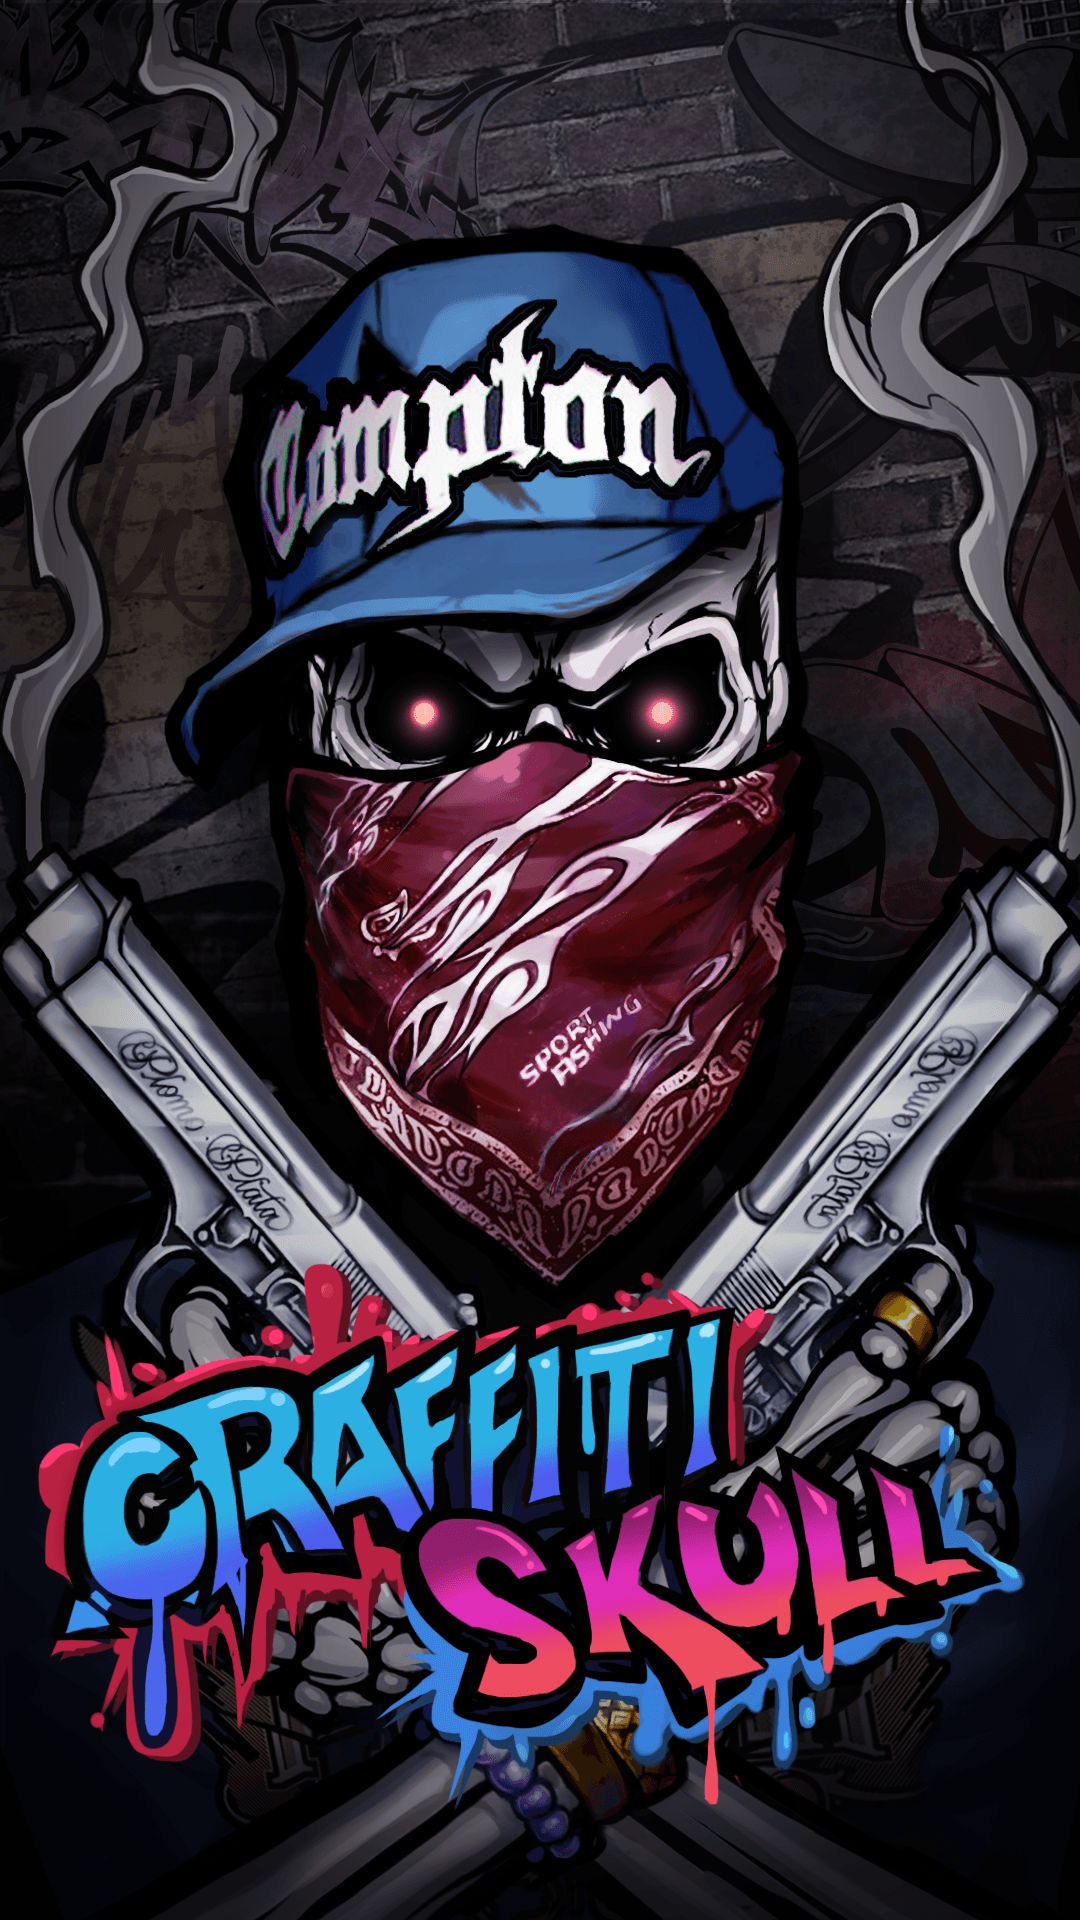 COOL GRAFFITI SKULL WALLPAPER! HIP HOP STYLE!. Android live